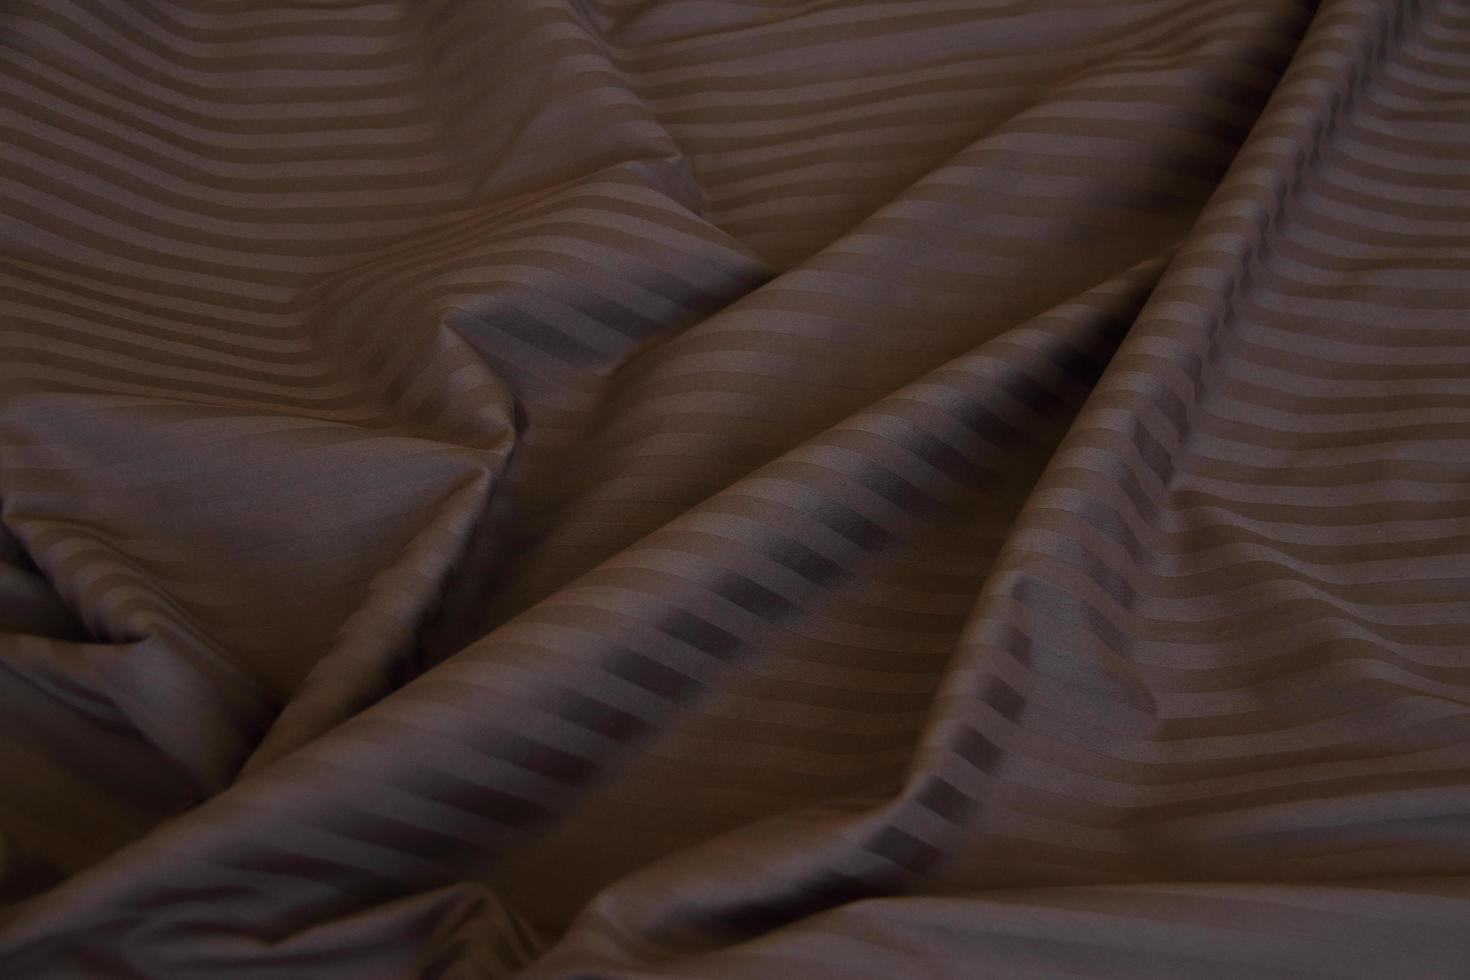 Wrinkled material with wrinkles, folds on fabric, fabric background. Linens. Brown with light stripes, blank photo